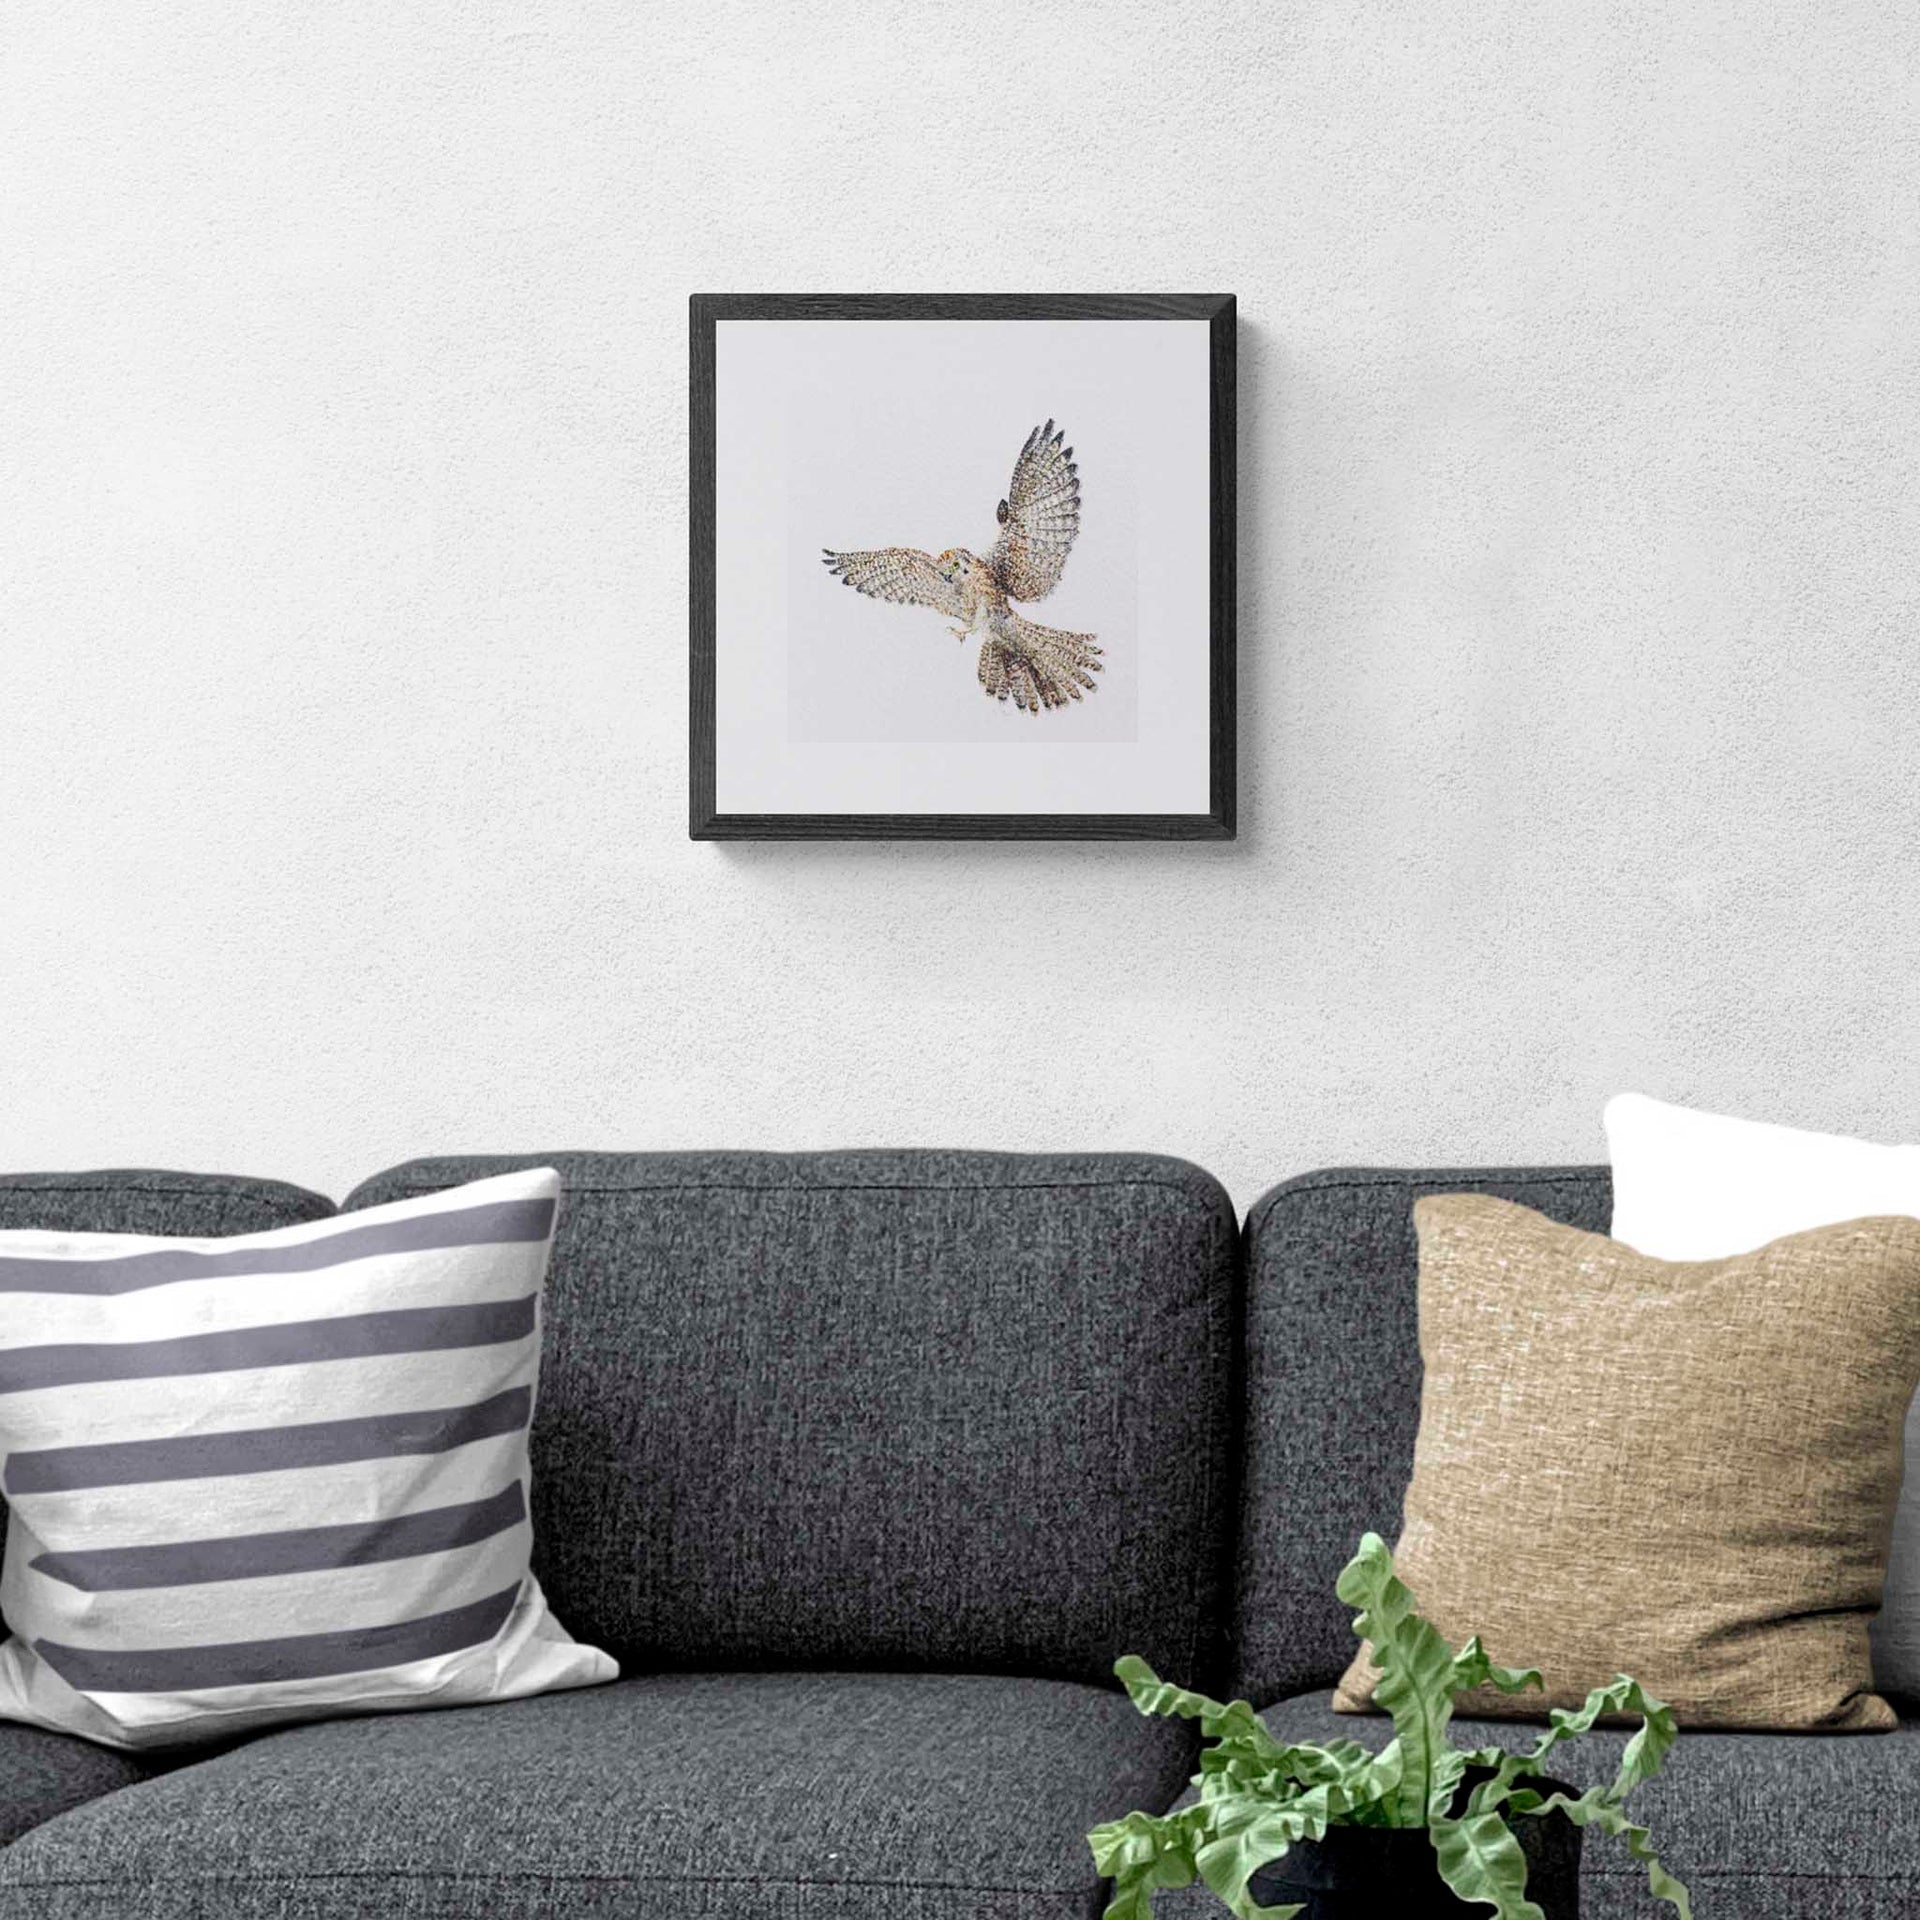 Limited Edition Print of Regent Kestrel hand embroidered artwork in black frame on the wall